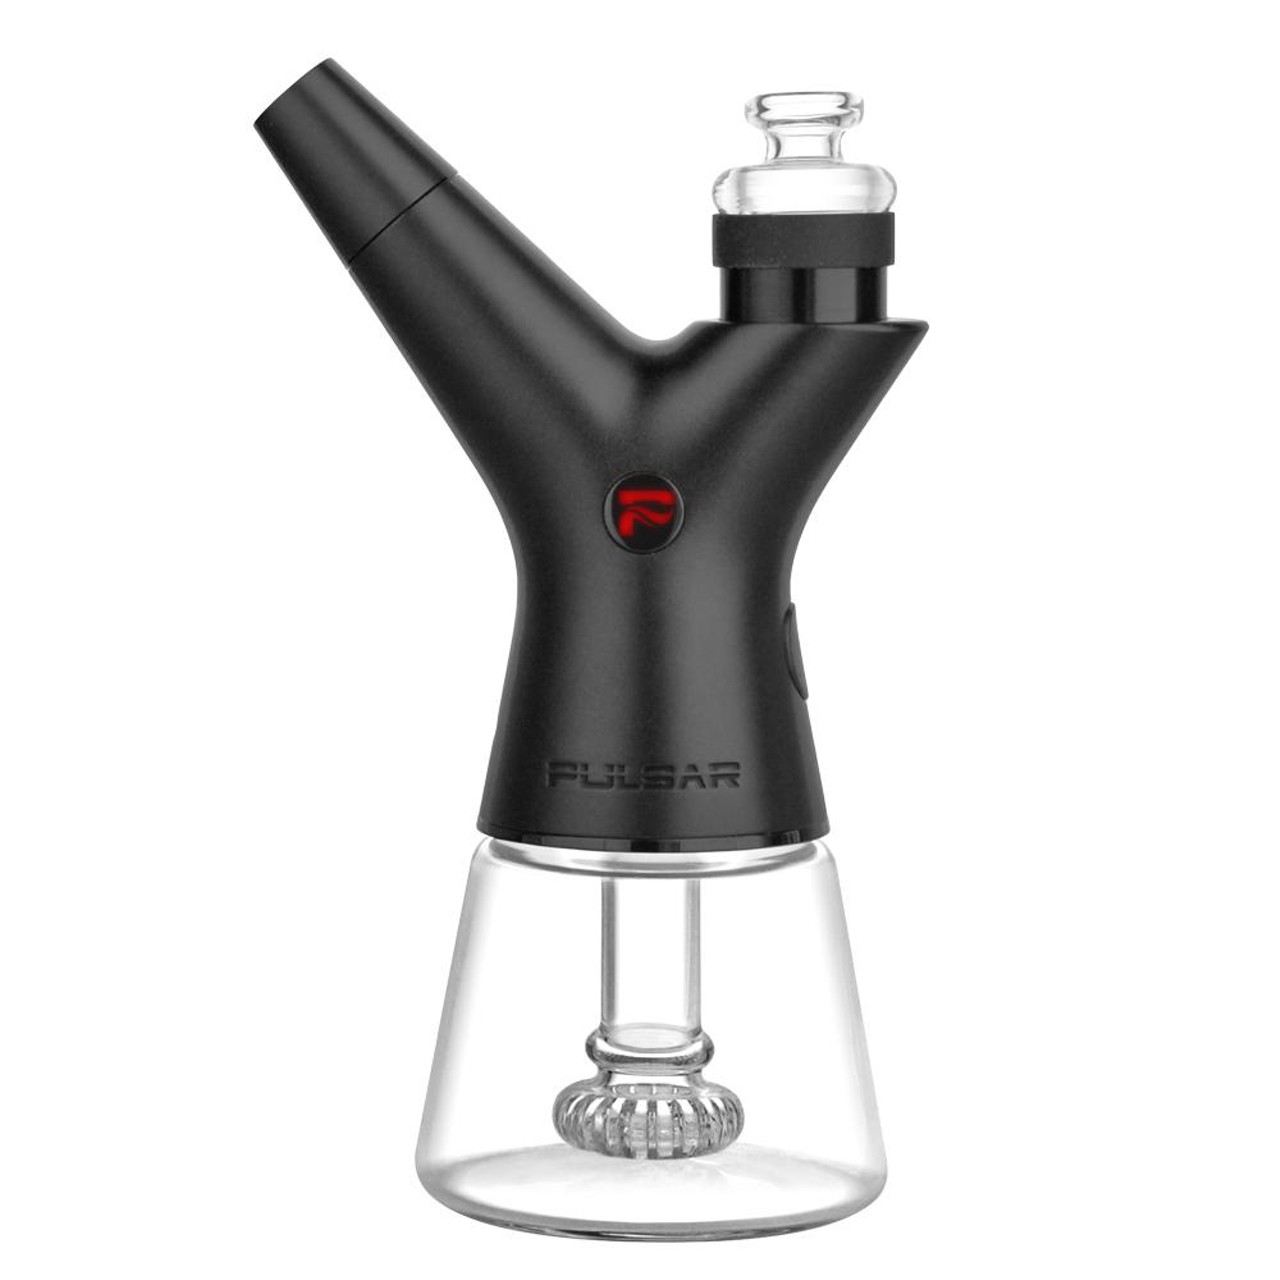 Dab rig
For canna-lovers in both categories: 
Pulsar Electric Dab Rig, $250
LIV, 2625 Hilton Rd., Ste. 100, Ferndale; 248-420-4200; livferndale.com
Do you even dab, bro? Why, yes, yes we do, and we&#146;re always on the hunt for a good rig. Well, a favorite electric rig of wax lovers and flower lovers alike is a bit on the pricey side, but according to its many glowing reviews it&#146;s worth every penny, especially because it's electric, meaning no scary fire required. The Pulsar Electric Dab Rig features three voltage settings, isolated air paths, and a whole lot of updates from previous models, including a much faster heat-up time. A standout feature for many of those who dare to dab is just how much the flavor of concentrates comes through without the butane or burnt taste. The rig also includes dabber tools, wire brushes, herb and wax carb caps, a coilless ceramic atomizer cup, and a charging cable. 
Photo via Weedmaps